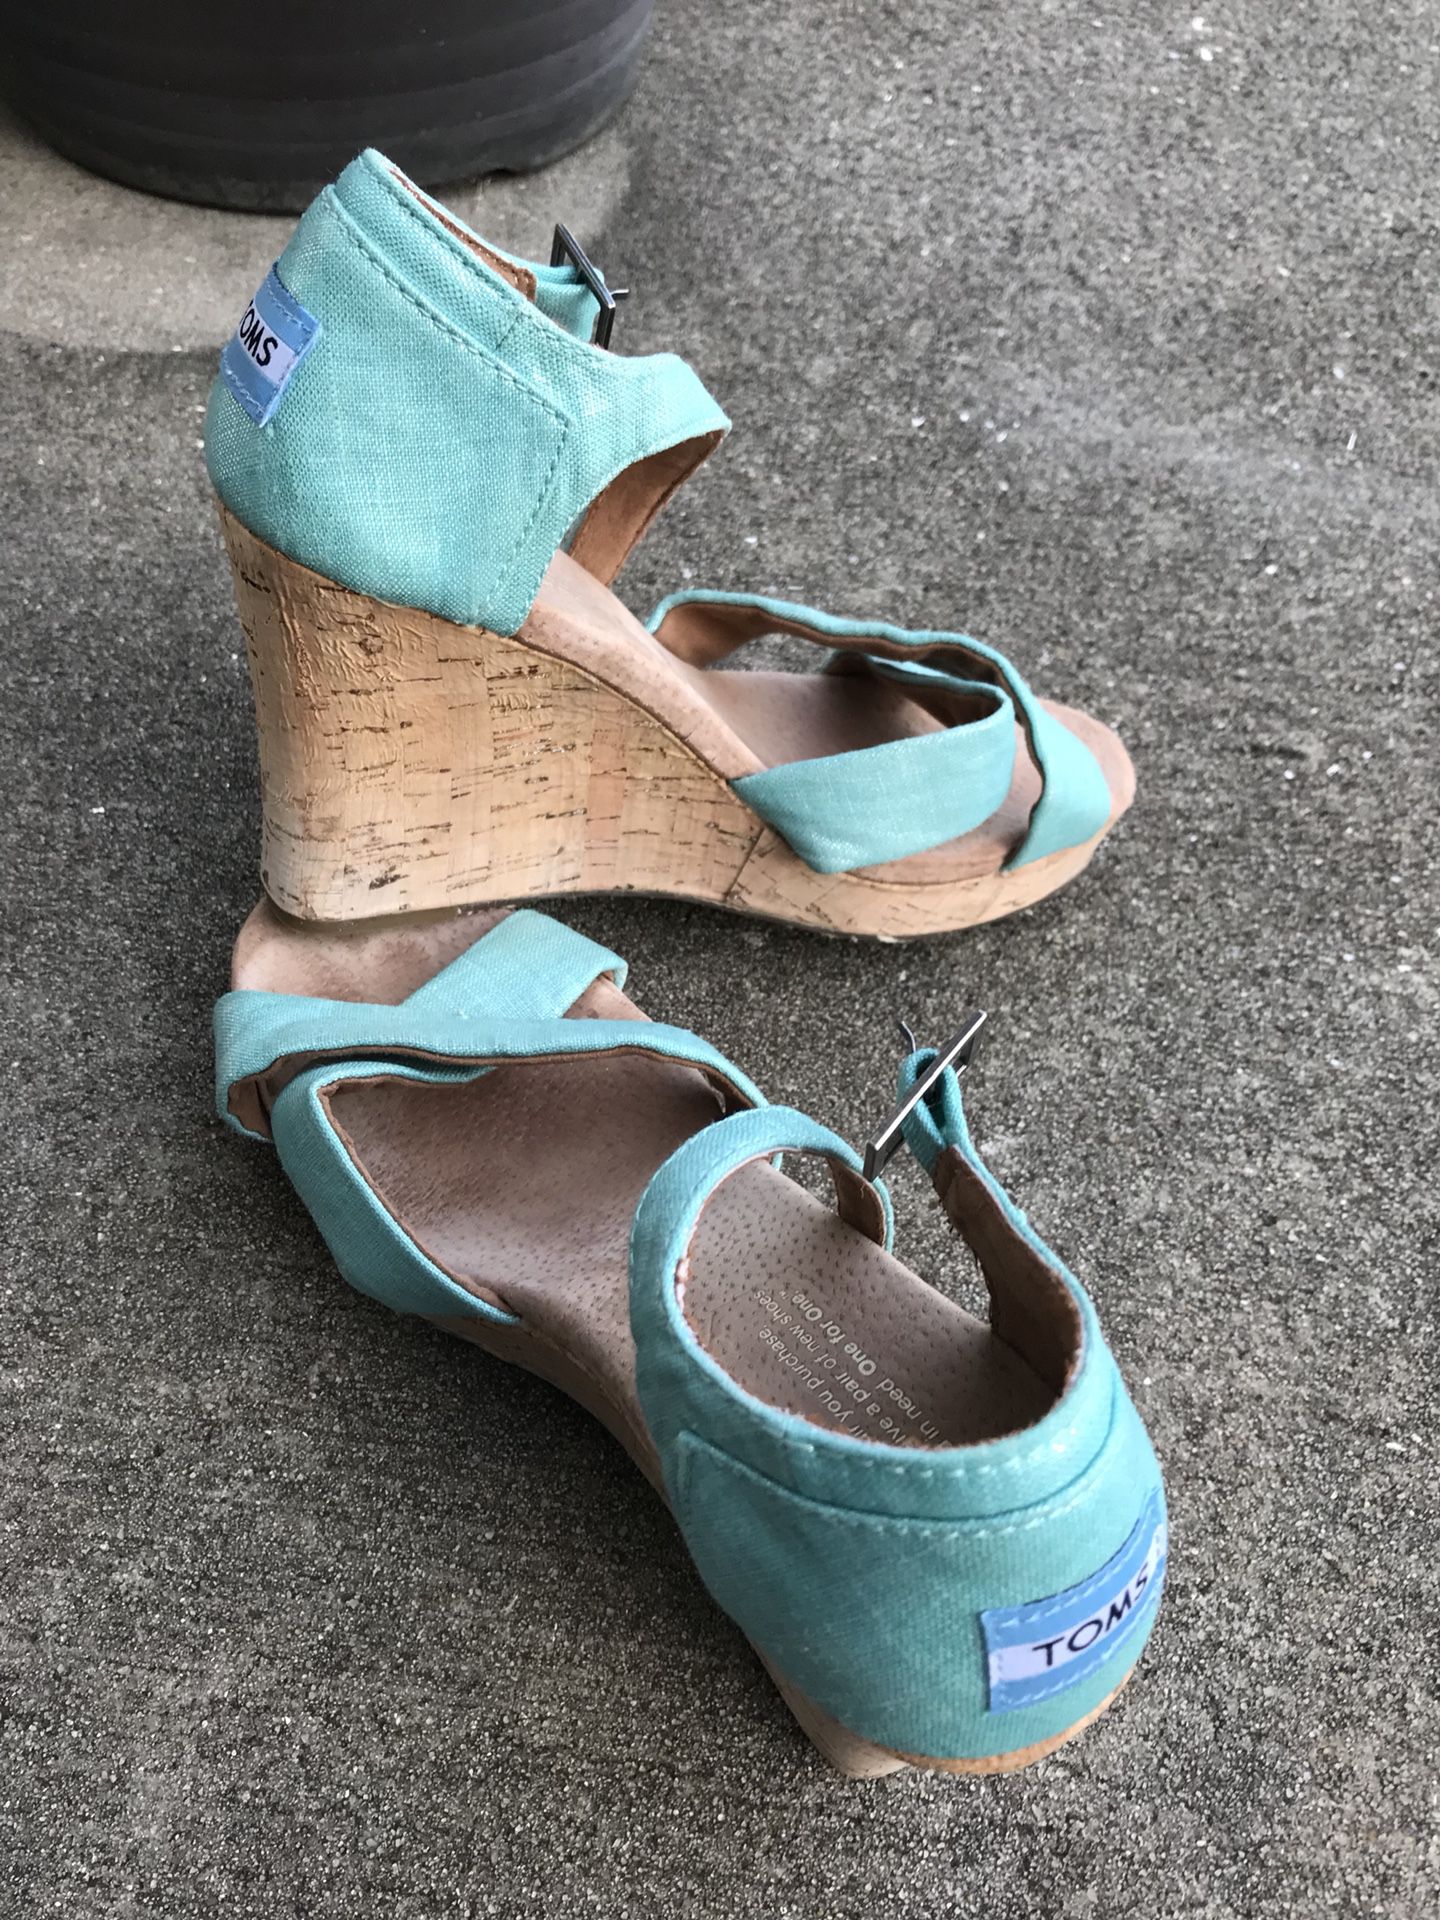 Toms Wedge size 7.5